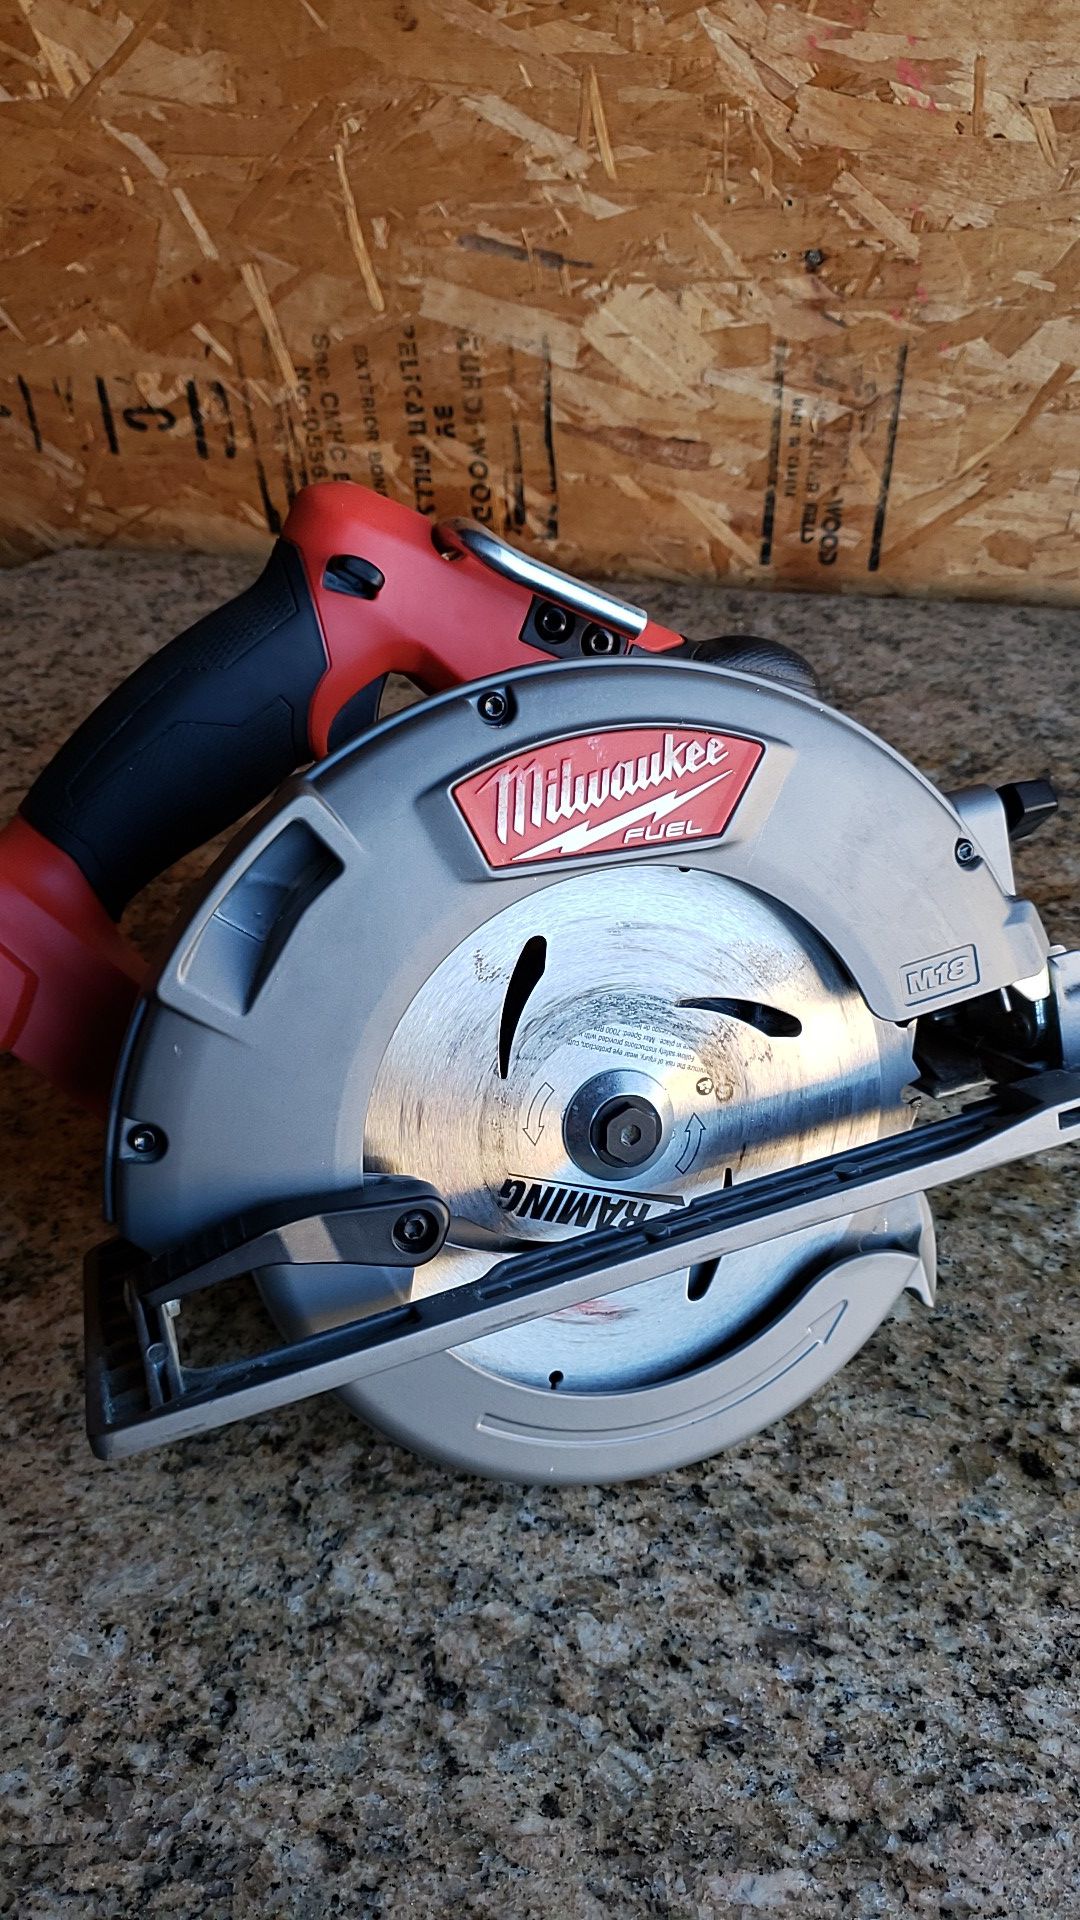 Milwaukee m18 fuel brushless 7-1/4" circular saw lightly used in good condition $80 FIRM NO OFFERS